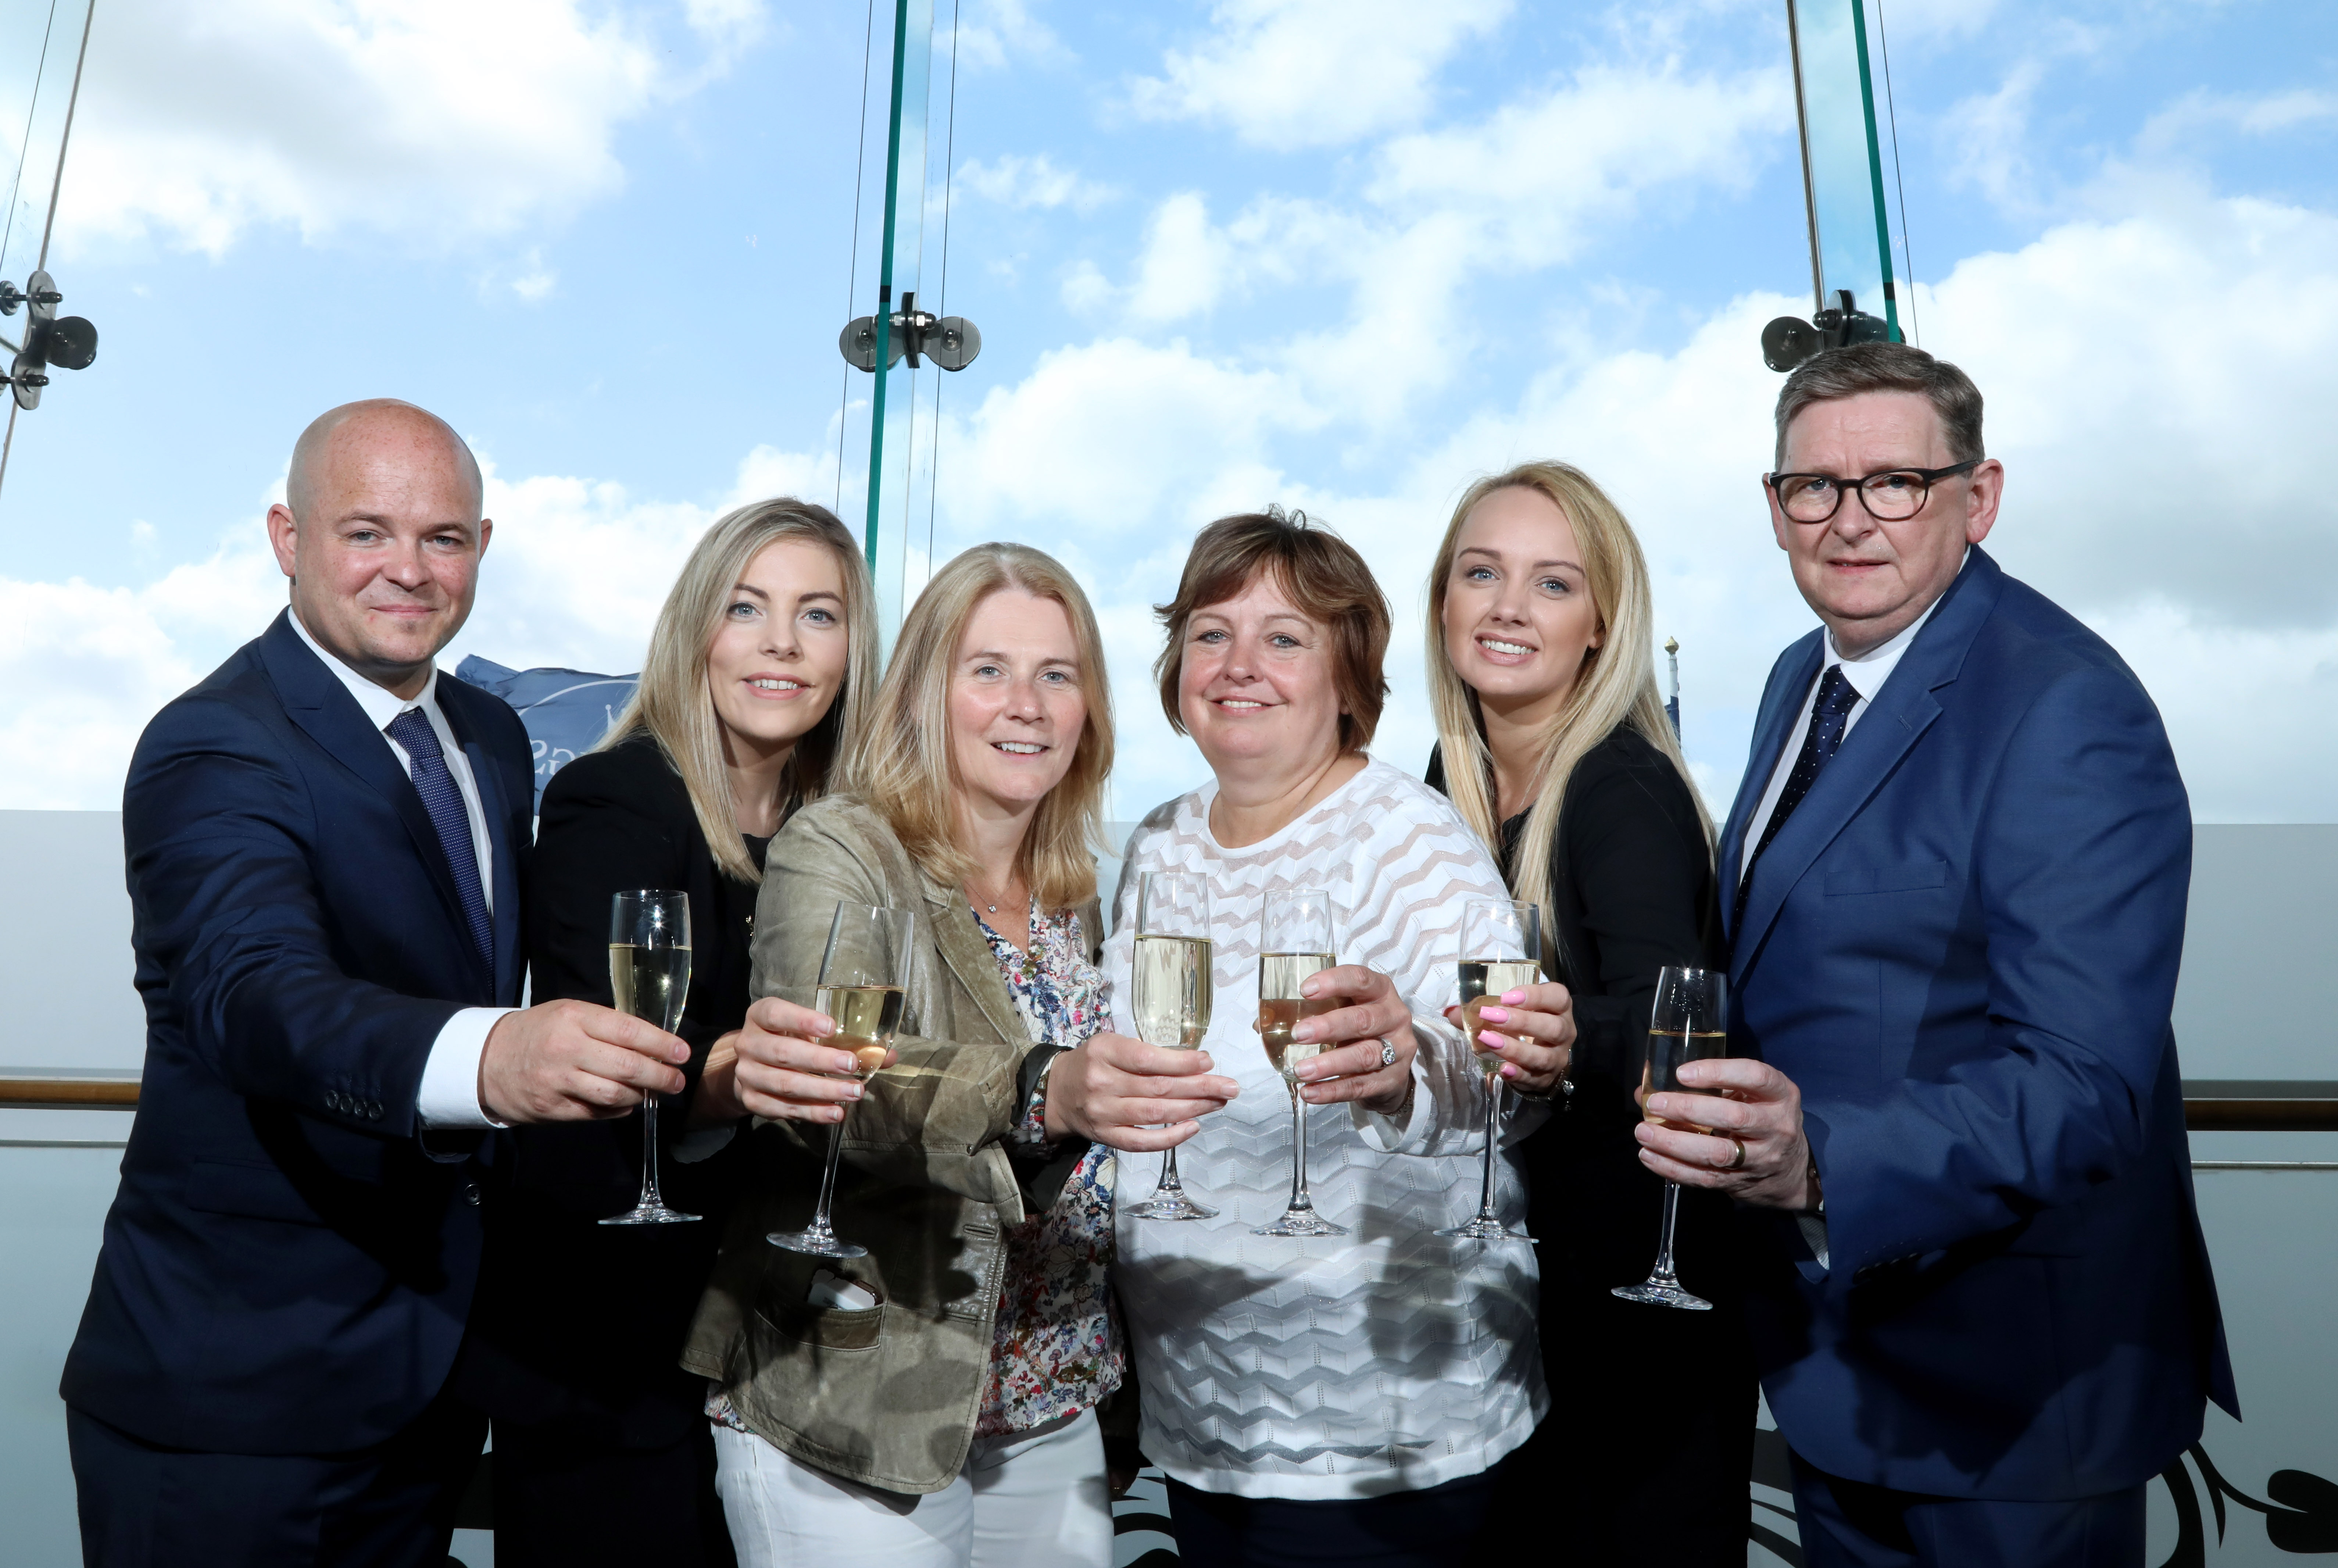 Seven The Best For Hastings Hotels Business Eye